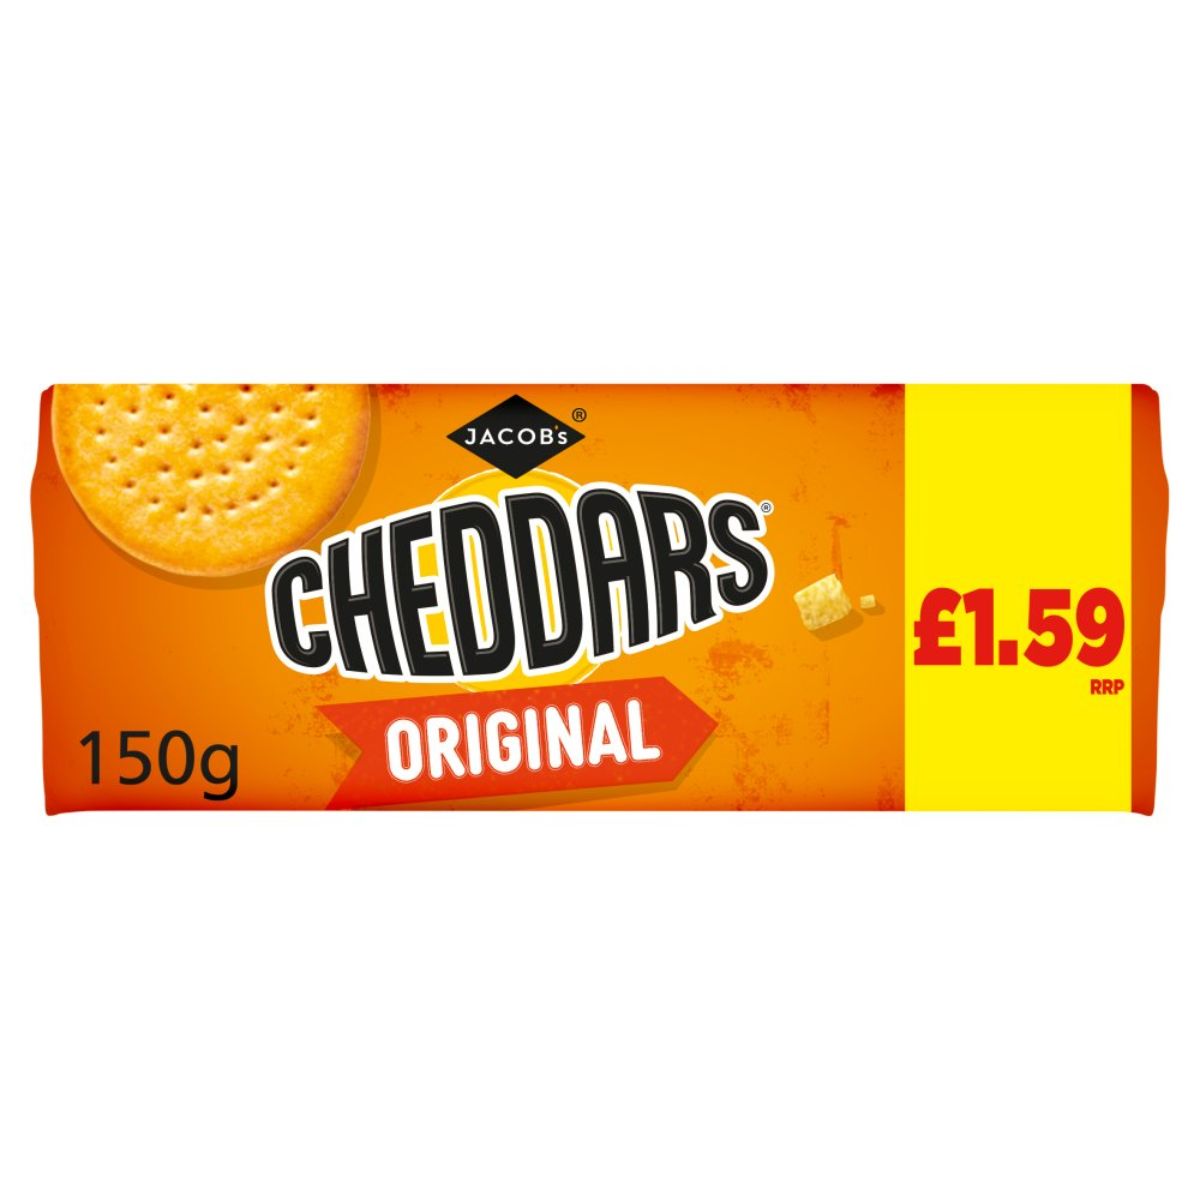 Jacobs - Cheddars Original - 150g cheese crackers.